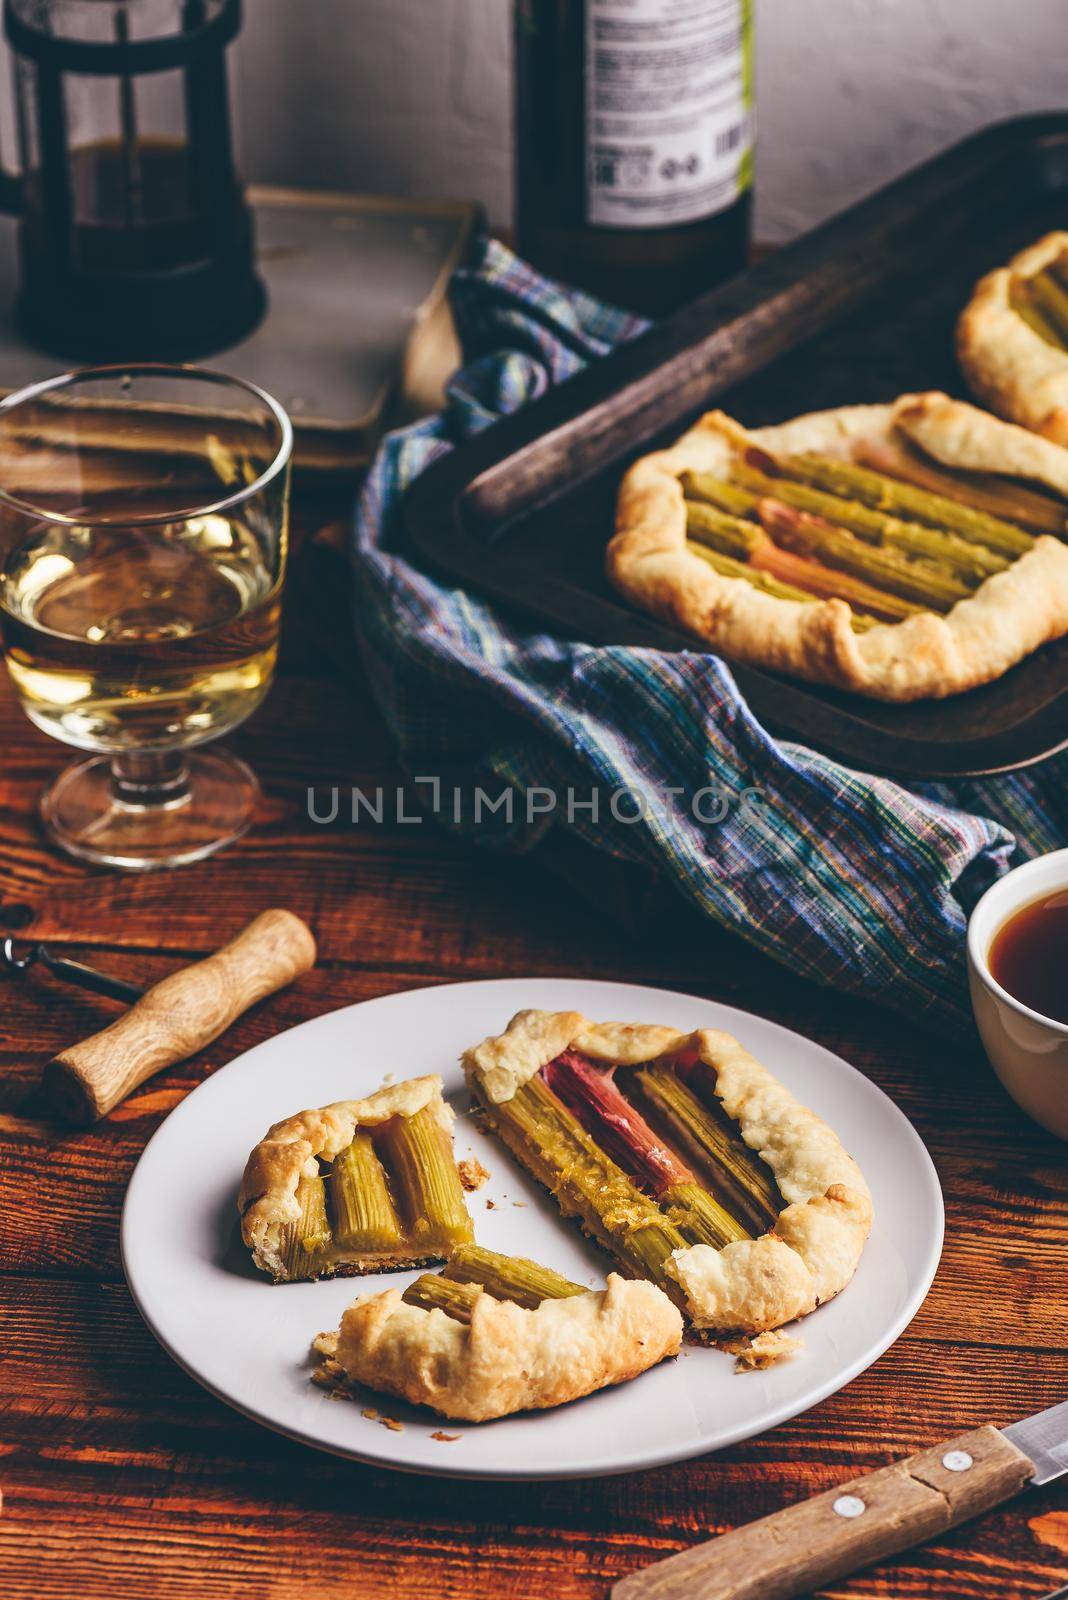 Rhubarb galette on plate with glass of wine by Seva_blsv